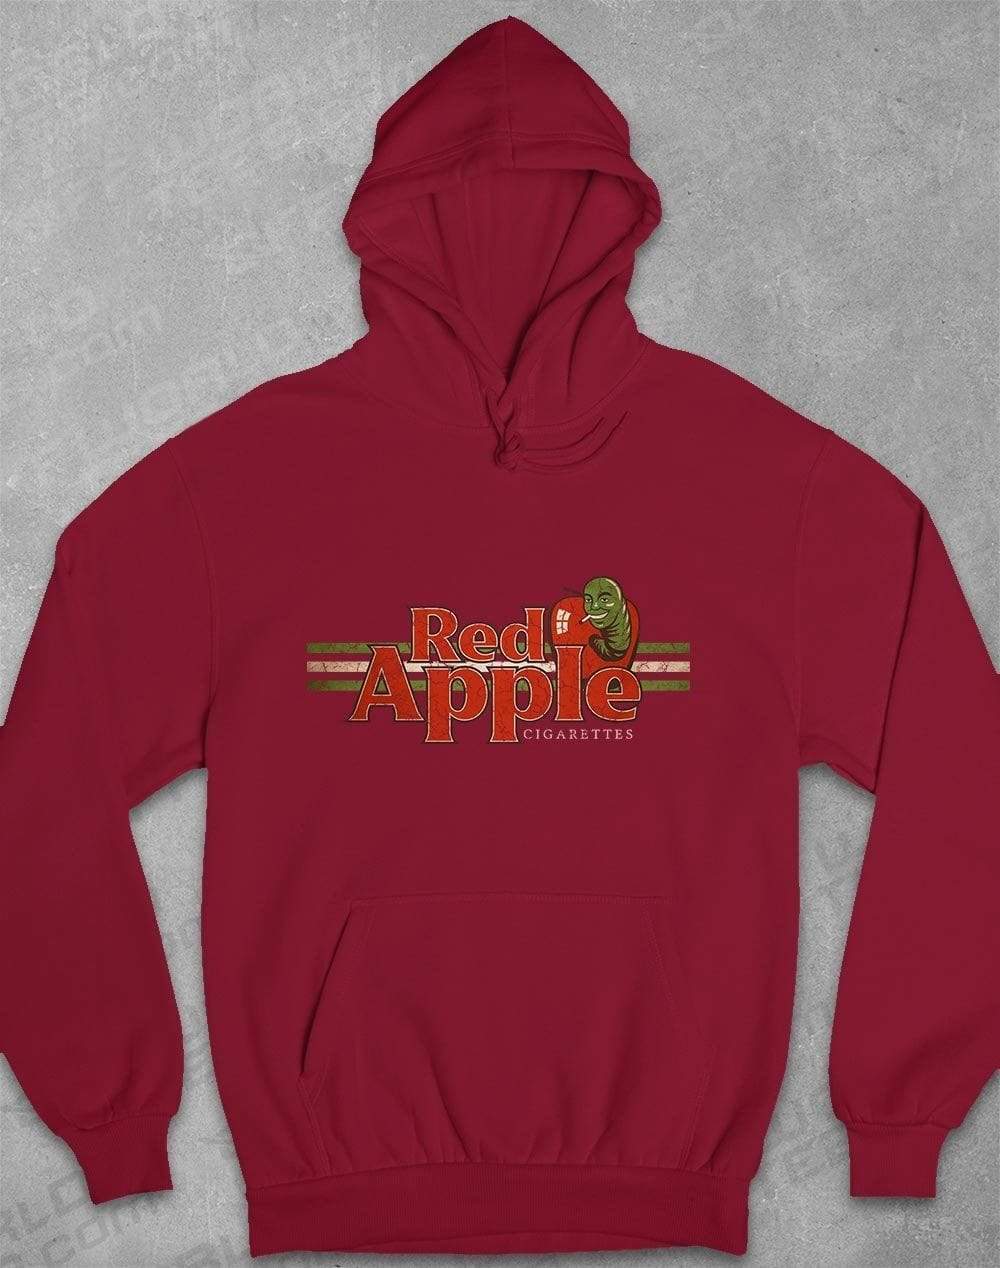 Red Apple Cigarettes Hoodie S / Burgundy  - Off World Tees